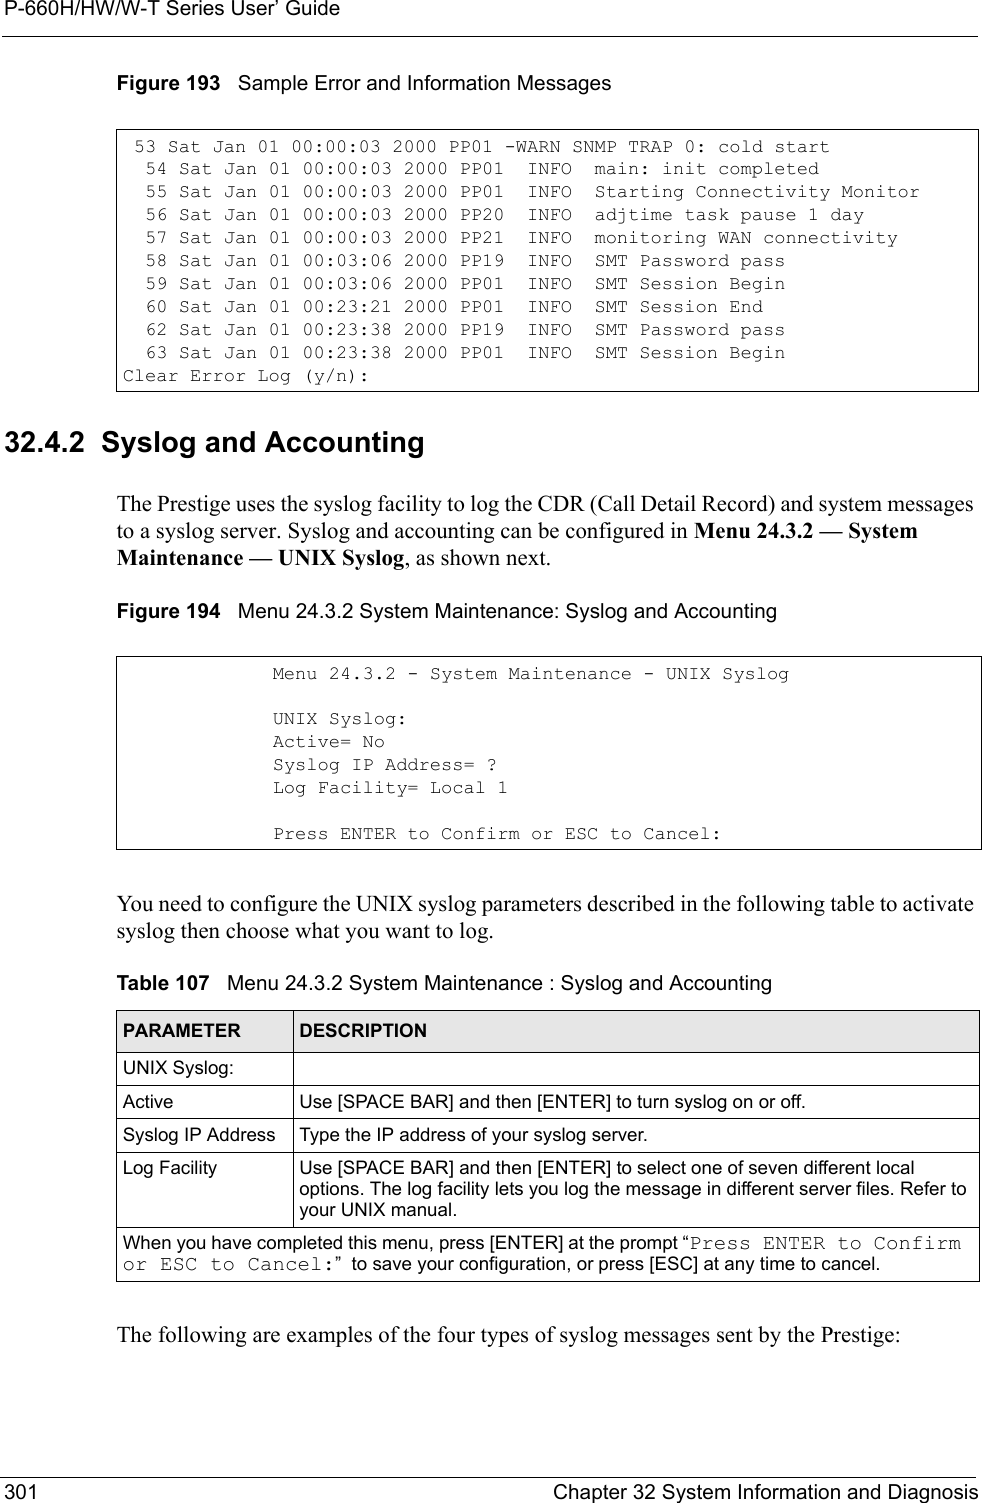 P-660H/HW/W-T Series User’ Guide301 Chapter 32 System Information and DiagnosisFigure 193   Sample Error and Information Messages32.4.2  Syslog and AccountingThe Prestige uses the syslog facility to log the CDR (Call Detail Record) and system messages to a syslog server. Syslog and accounting can be configured in Menu 24.3.2 — System Maintenance — UNIX Syslog, as shown next.Figure 194   Menu 24.3.2 System Maintenance: Syslog and AccountingYou need to configure the UNIX syslog parameters described in the following table to activate syslog then choose what you want to log.The following are examples of the four types of syslog messages sent by the Prestige: 53 Sat Jan 01 00:00:03 2000 PP01 -WARN SNMP TRAP 0: cold start  54 Sat Jan 01 00:00:03 2000 PP01  INFO  main: init completed  55 Sat Jan 01 00:00:03 2000 PP01  INFO  Starting Connectivity Monitor  56 Sat Jan 01 00:00:03 2000 PP20  INFO  adjtime task pause 1 day  57 Sat Jan 01 00:00:03 2000 PP21  INFO  monitoring WAN connectivity  58 Sat Jan 01 00:03:06 2000 PP19  INFO  SMT Password pass  59 Sat Jan 01 00:03:06 2000 PP01  INFO  SMT Session Begin  60 Sat Jan 01 00:23:21 2000 PP01  INFO  SMT Session End  62 Sat Jan 01 00:23:38 2000 PP19  INFO  SMT Password pass  63 Sat Jan 01 00:23:38 2000 PP01  INFO  SMT Session BeginClear Error Log (y/n):Menu 24.3.2 - System Maintenance - UNIX SyslogUNIX Syslog:Active= NoSyslog IP Address= ?Log Facility= Local 1Press ENTER to Confirm or ESC to Cancel:Table 107   Menu 24.3.2 System Maintenance : Syslog and AccountingPARAMETER DESCRIPTIONUNIX Syslog:Active Use [SPACE BAR] and then [ENTER] to turn syslog on or off.Syslog IP Address Type the IP address of your syslog server.Log Facility Use [SPACE BAR] and then [ENTER] to select one of seven different local options. The log facility lets you log the message in different server files. Refer to your UNIX manual.When you have completed this menu, press [ENTER] at the prompt “Press ENTER to Confirm or ESC to Cancel:”  to save your configuration, or press [ESC] at any time to cancel.